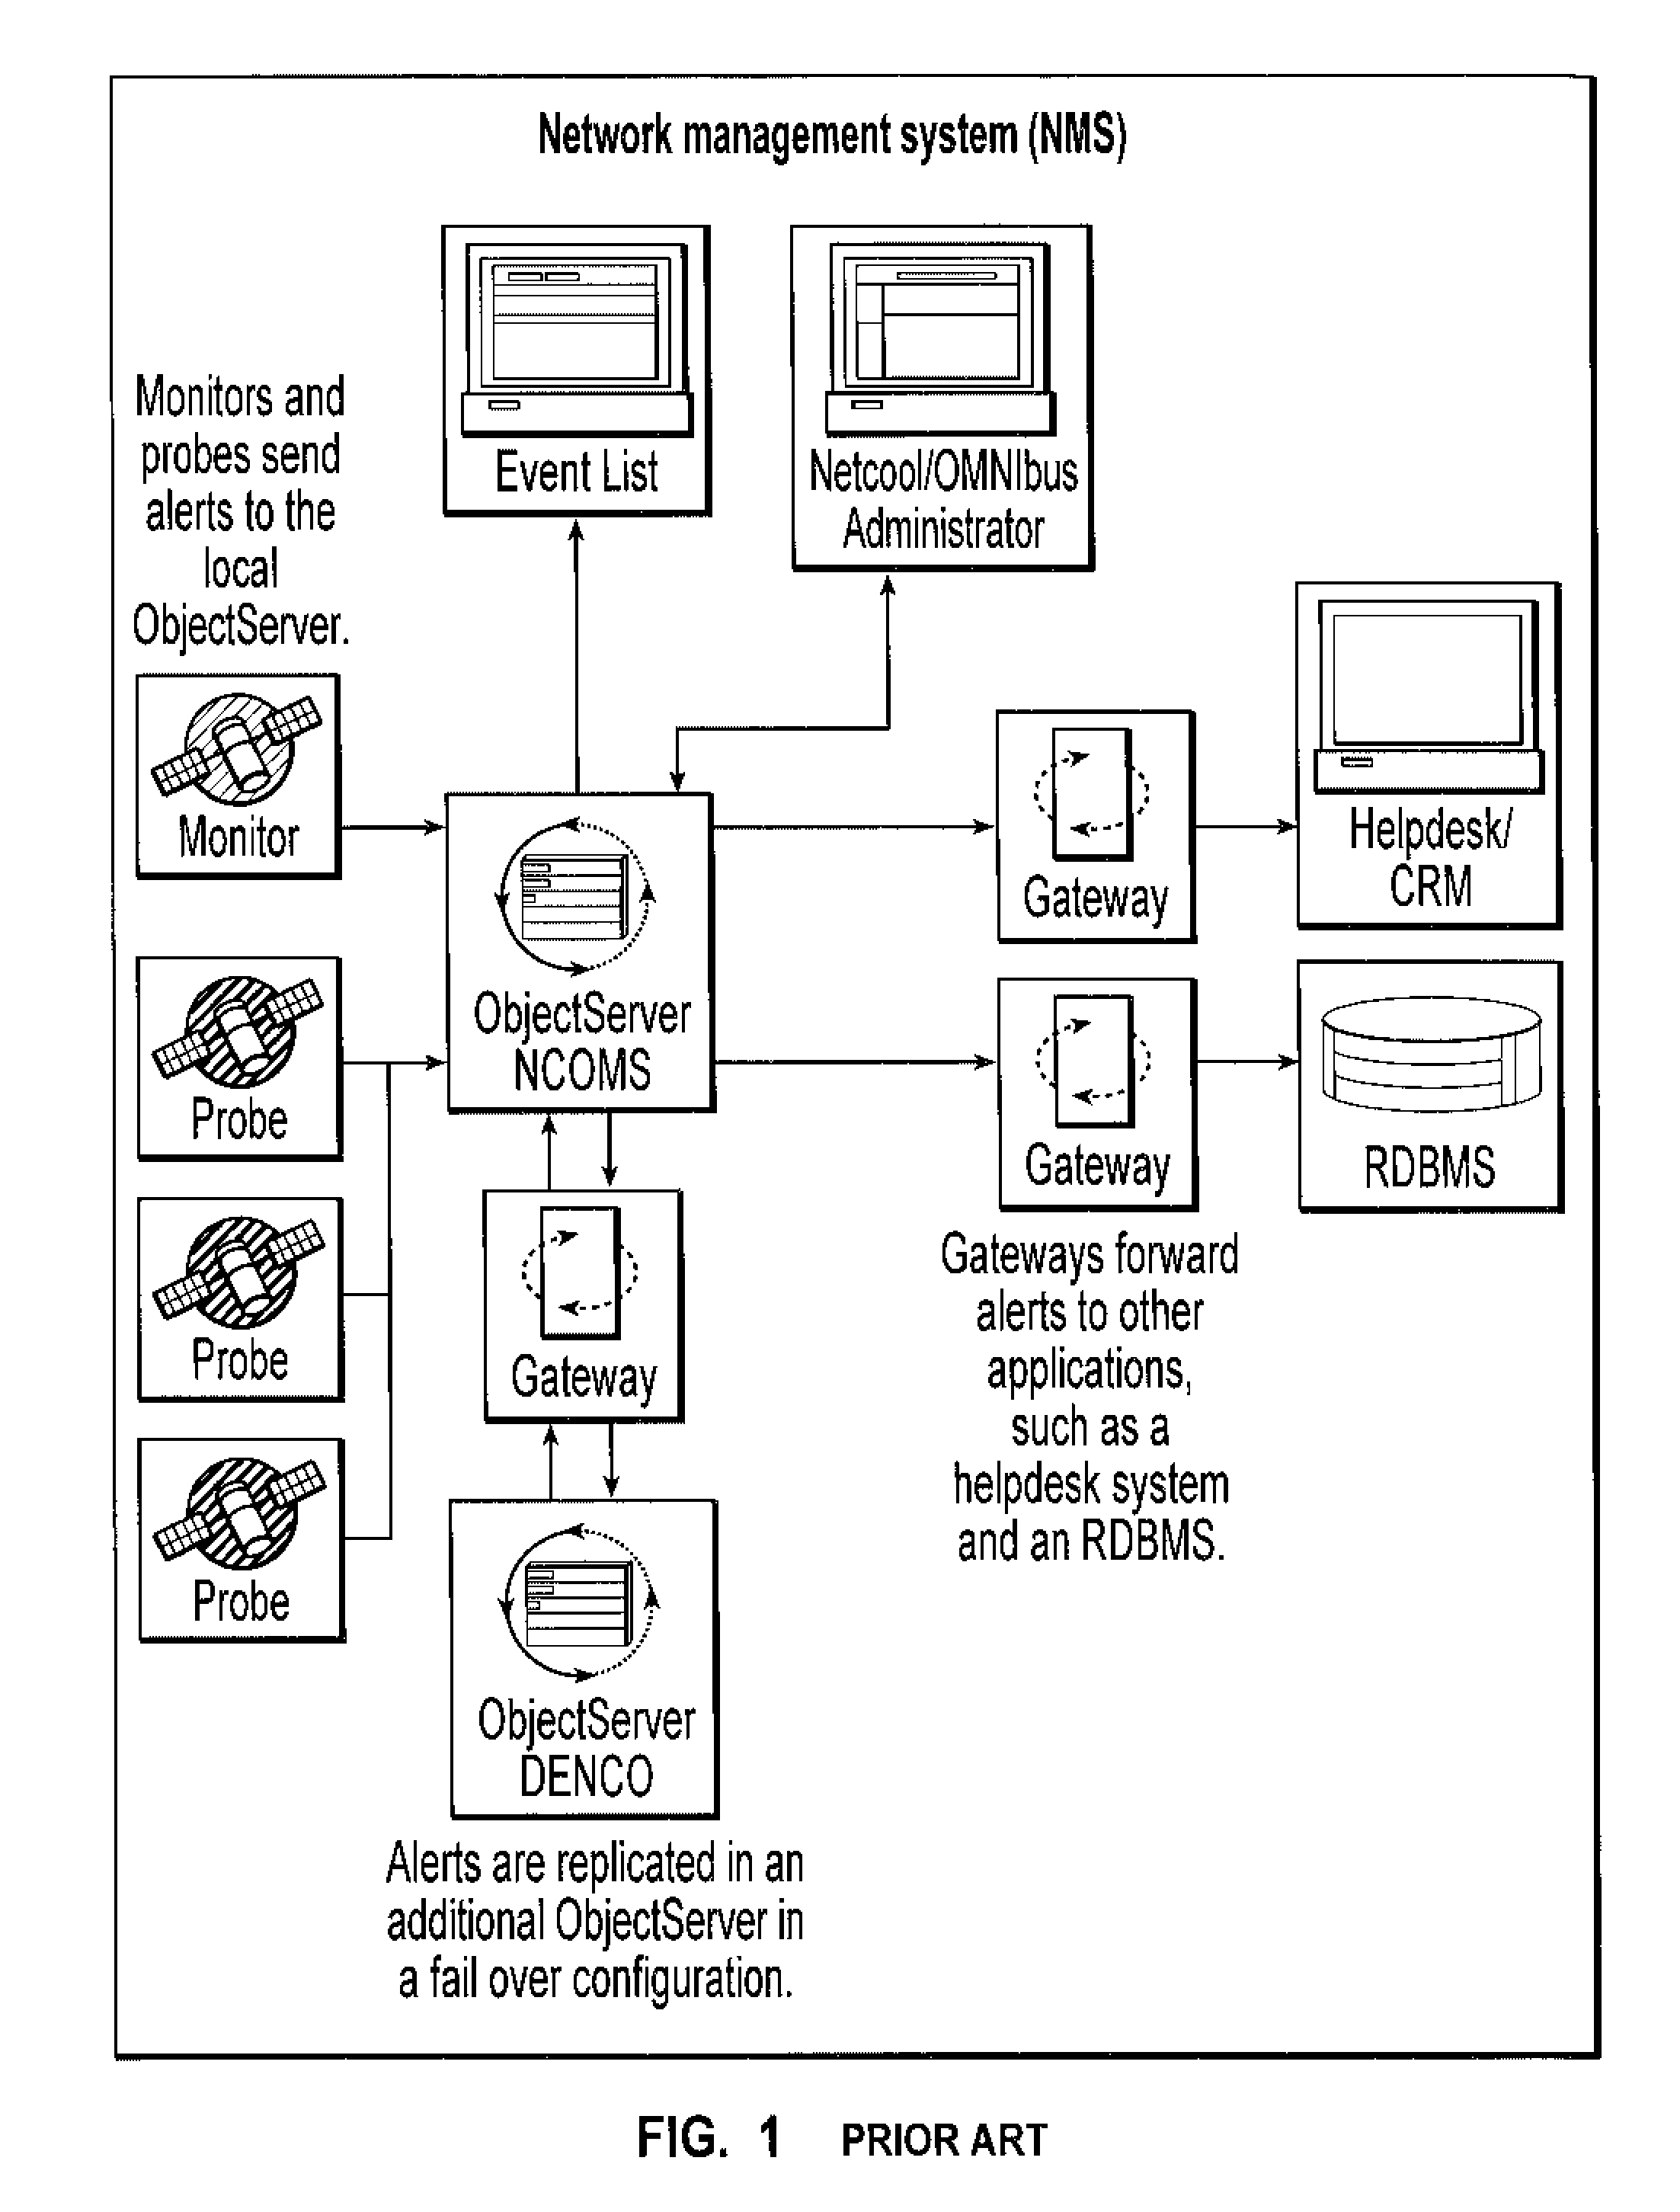 Method and apparatus for propagating accelerated events in a network management system